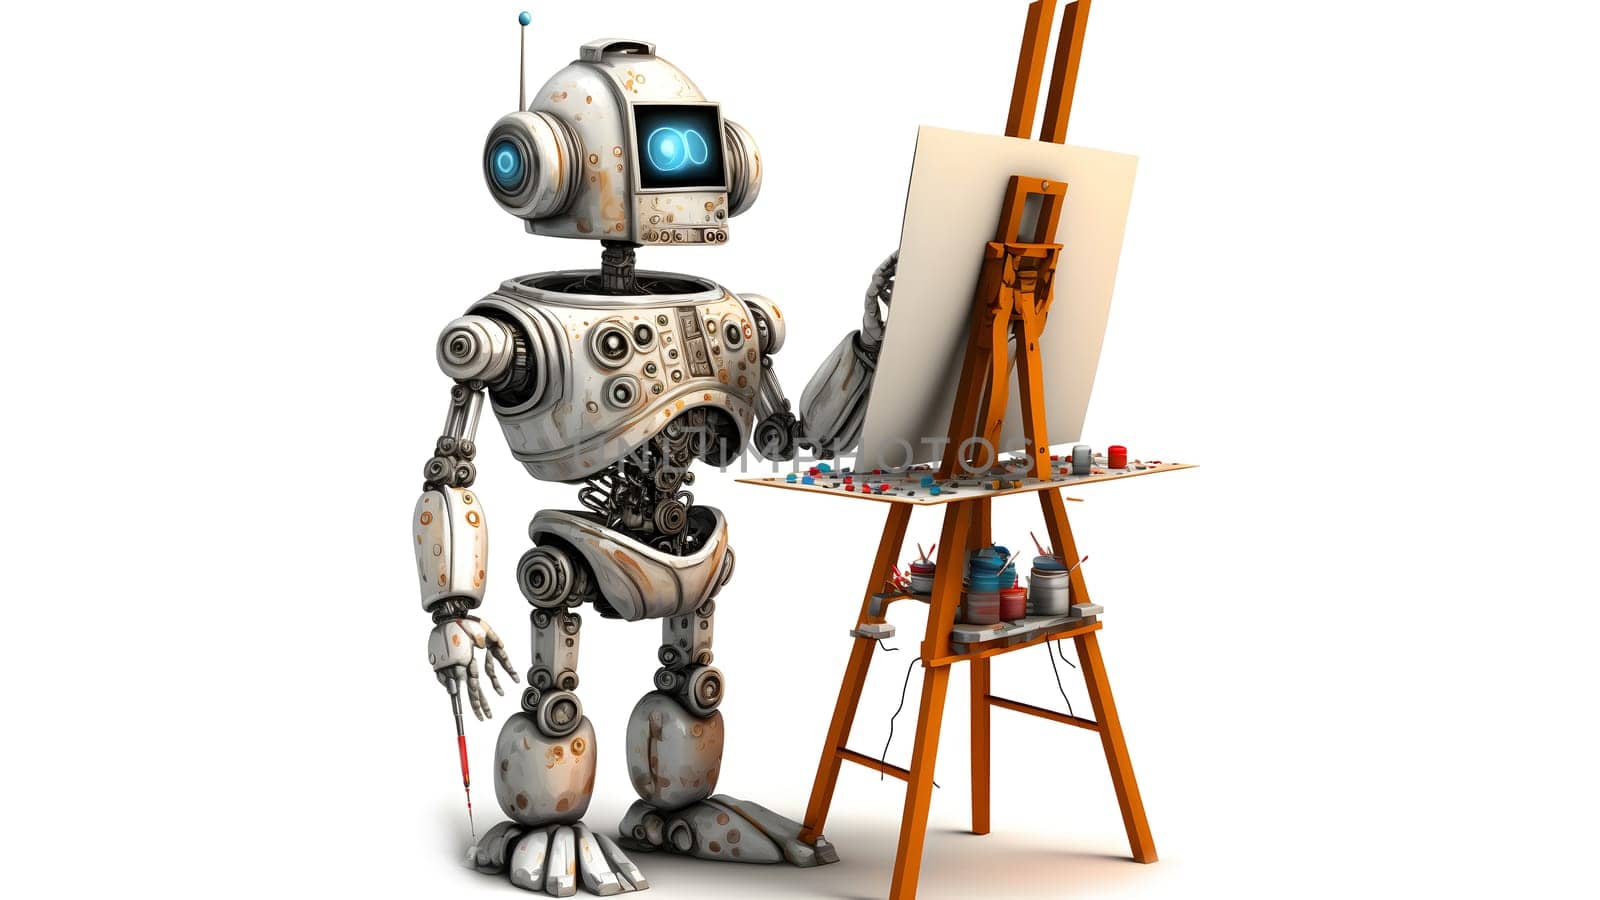 friendly robot artist in the studio next to his easel, painting and paints on white background, neural network generated art. Digitally generated image. Not based on any actual person or scene.